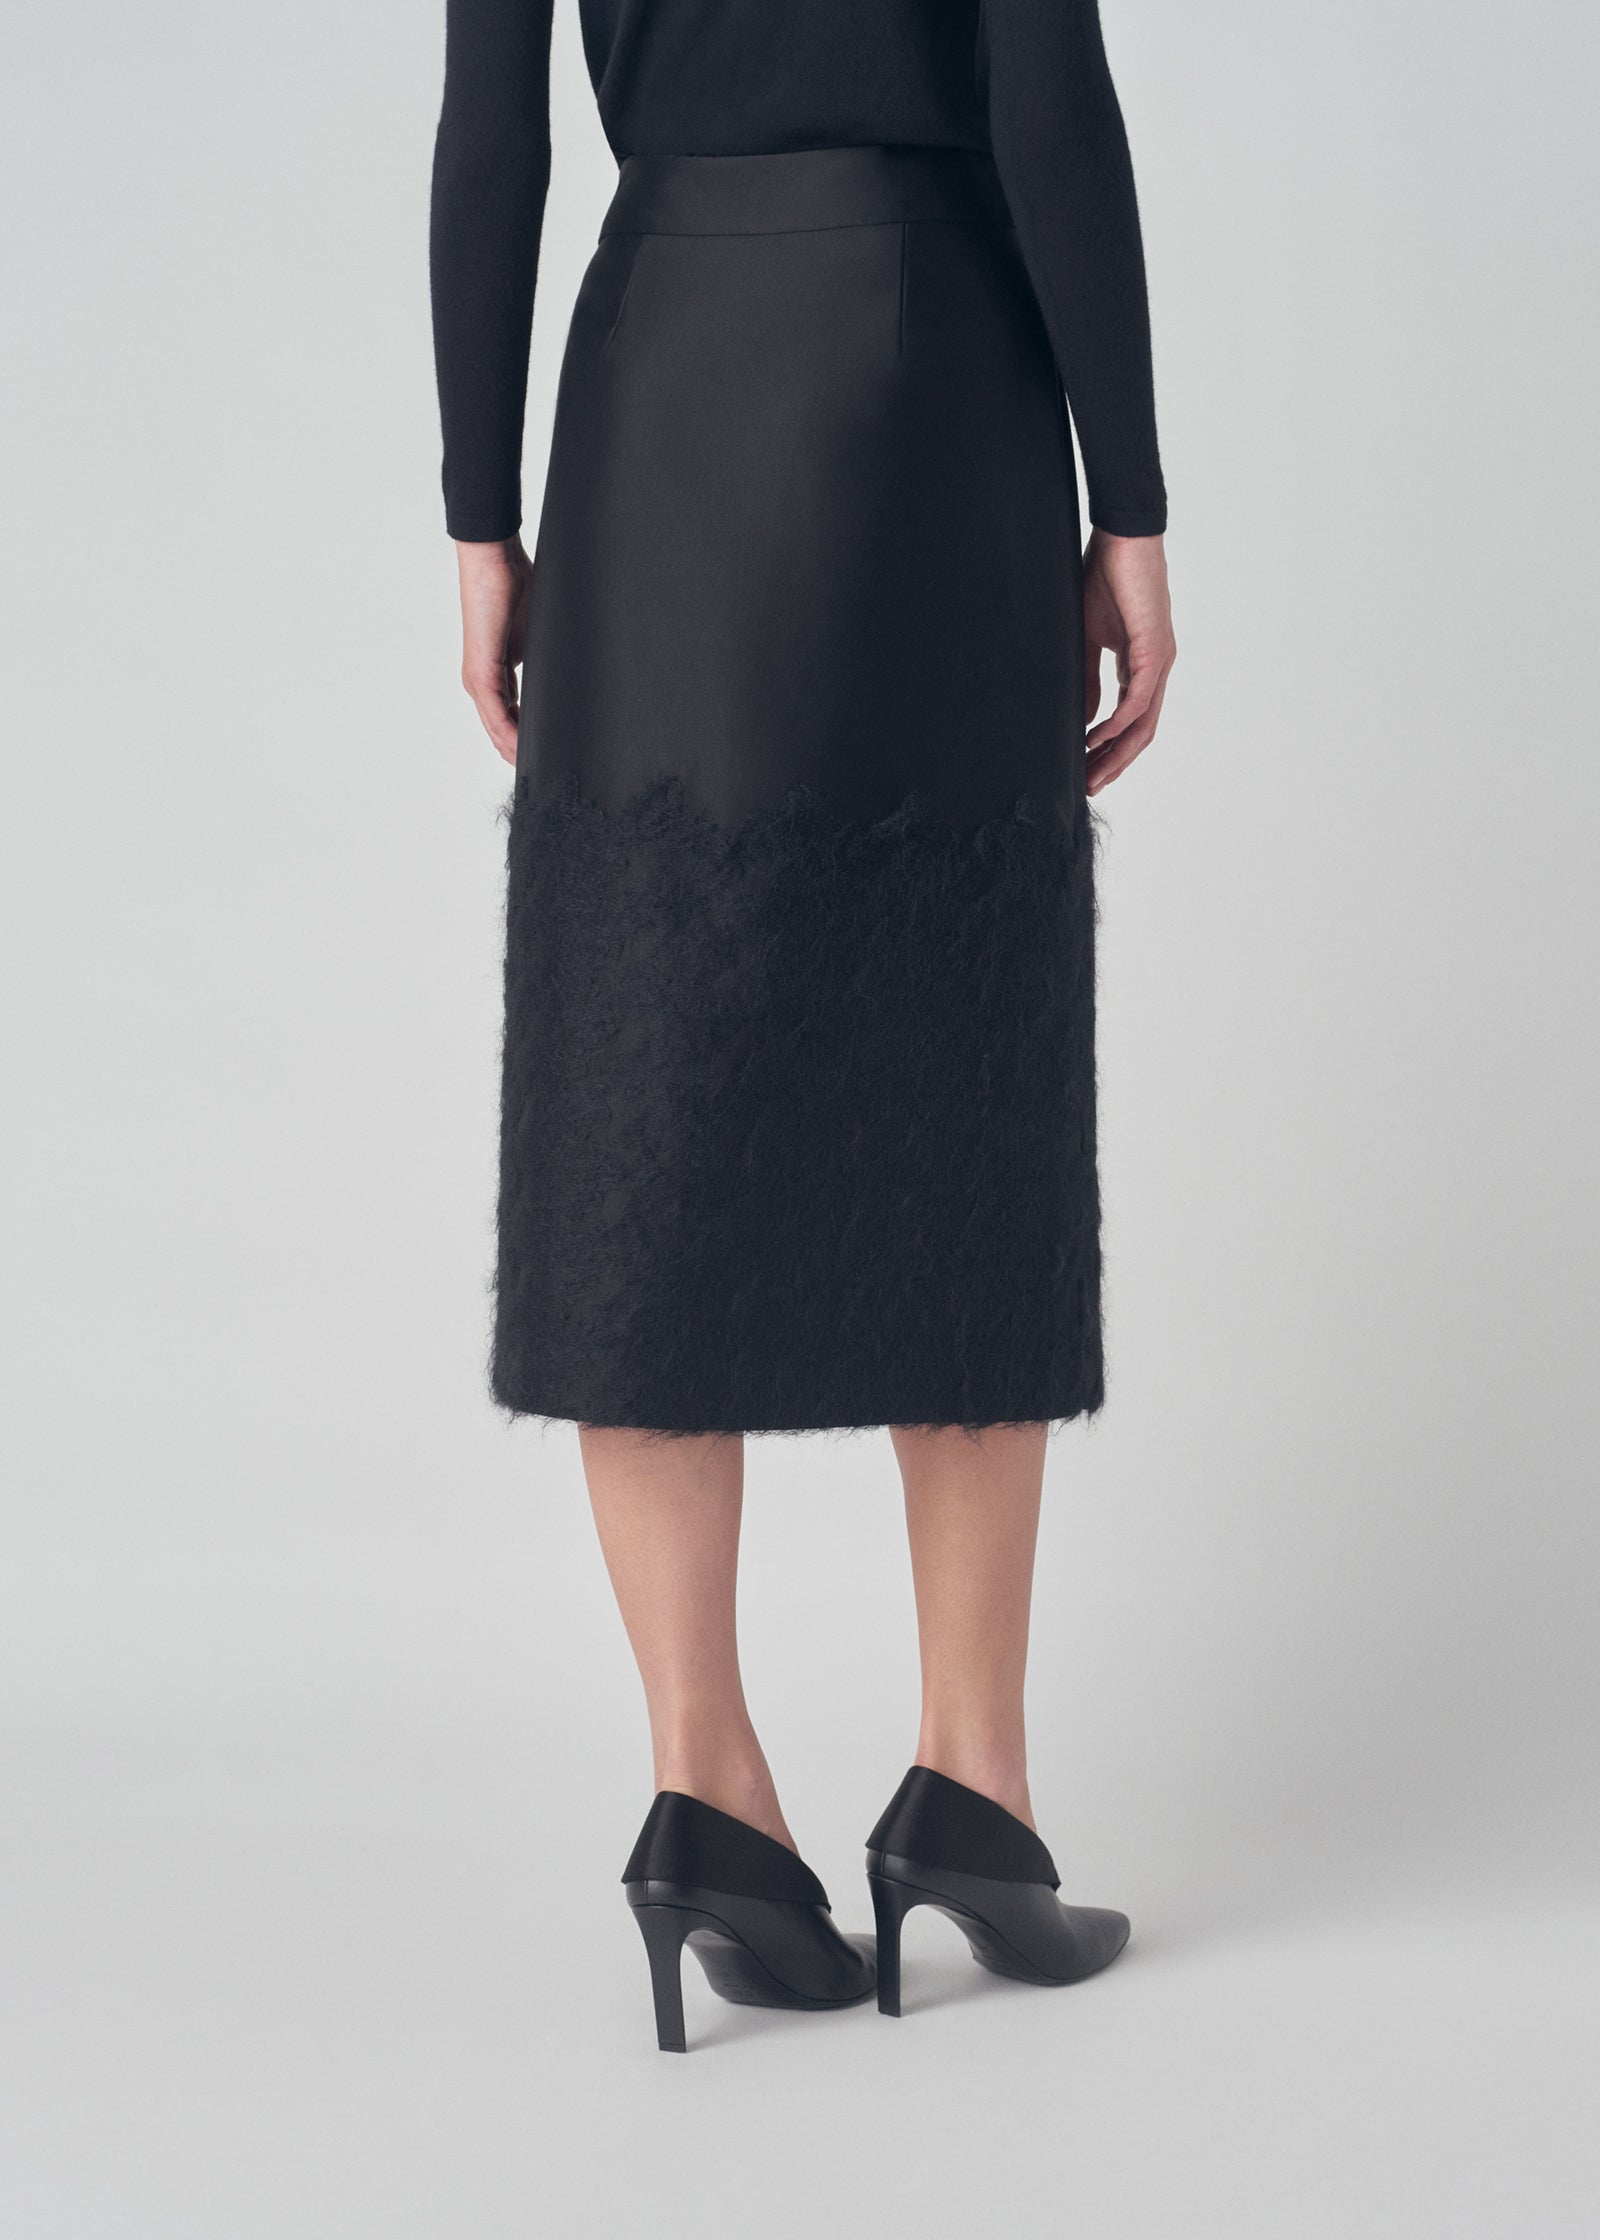 Embroidered Wrap Skirt in Duchess Satin - Black - CO Collections